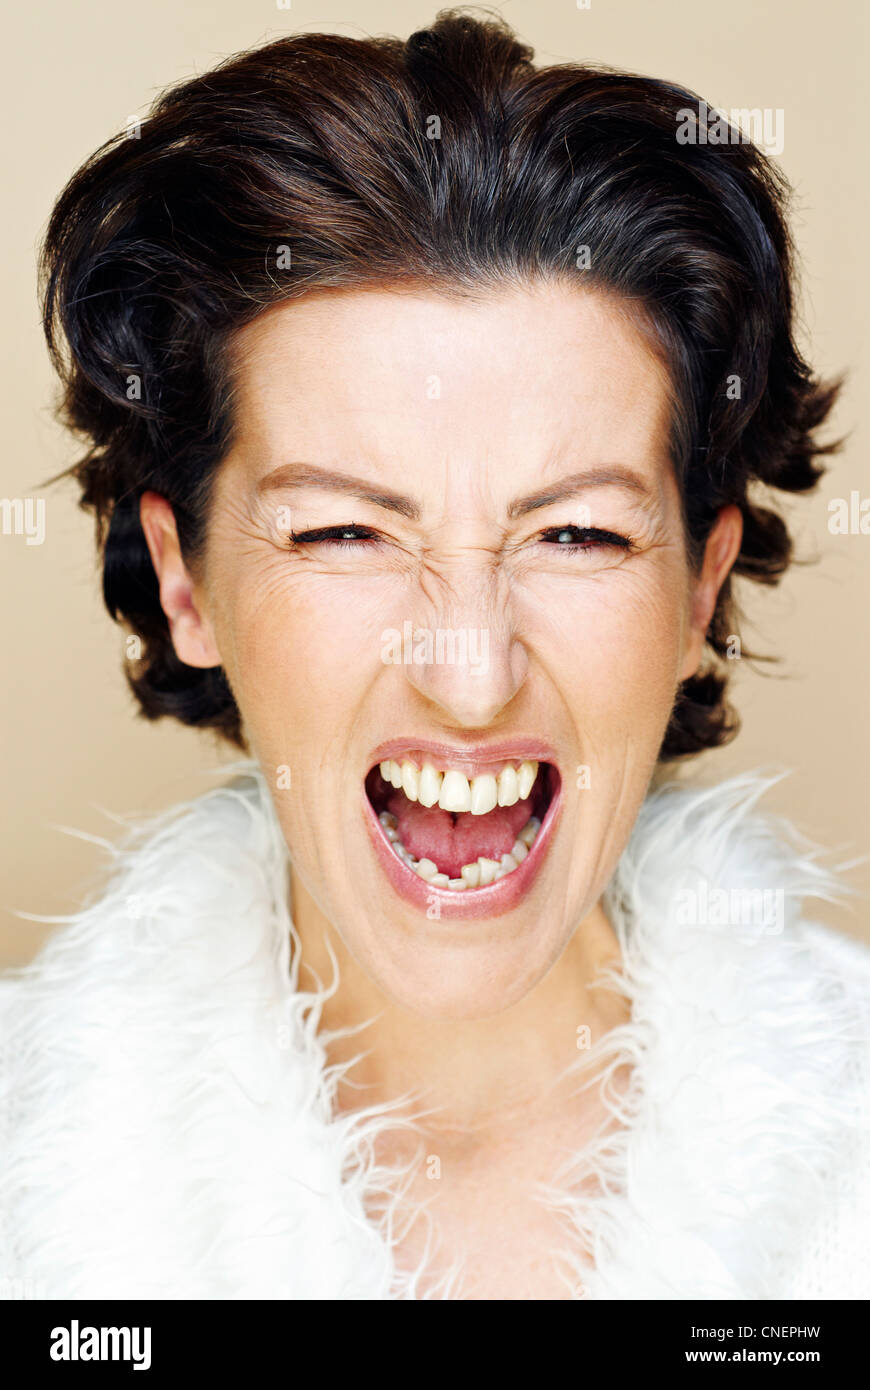 portrait of dark-haired woman in her forties shouting into camera Stock Photo